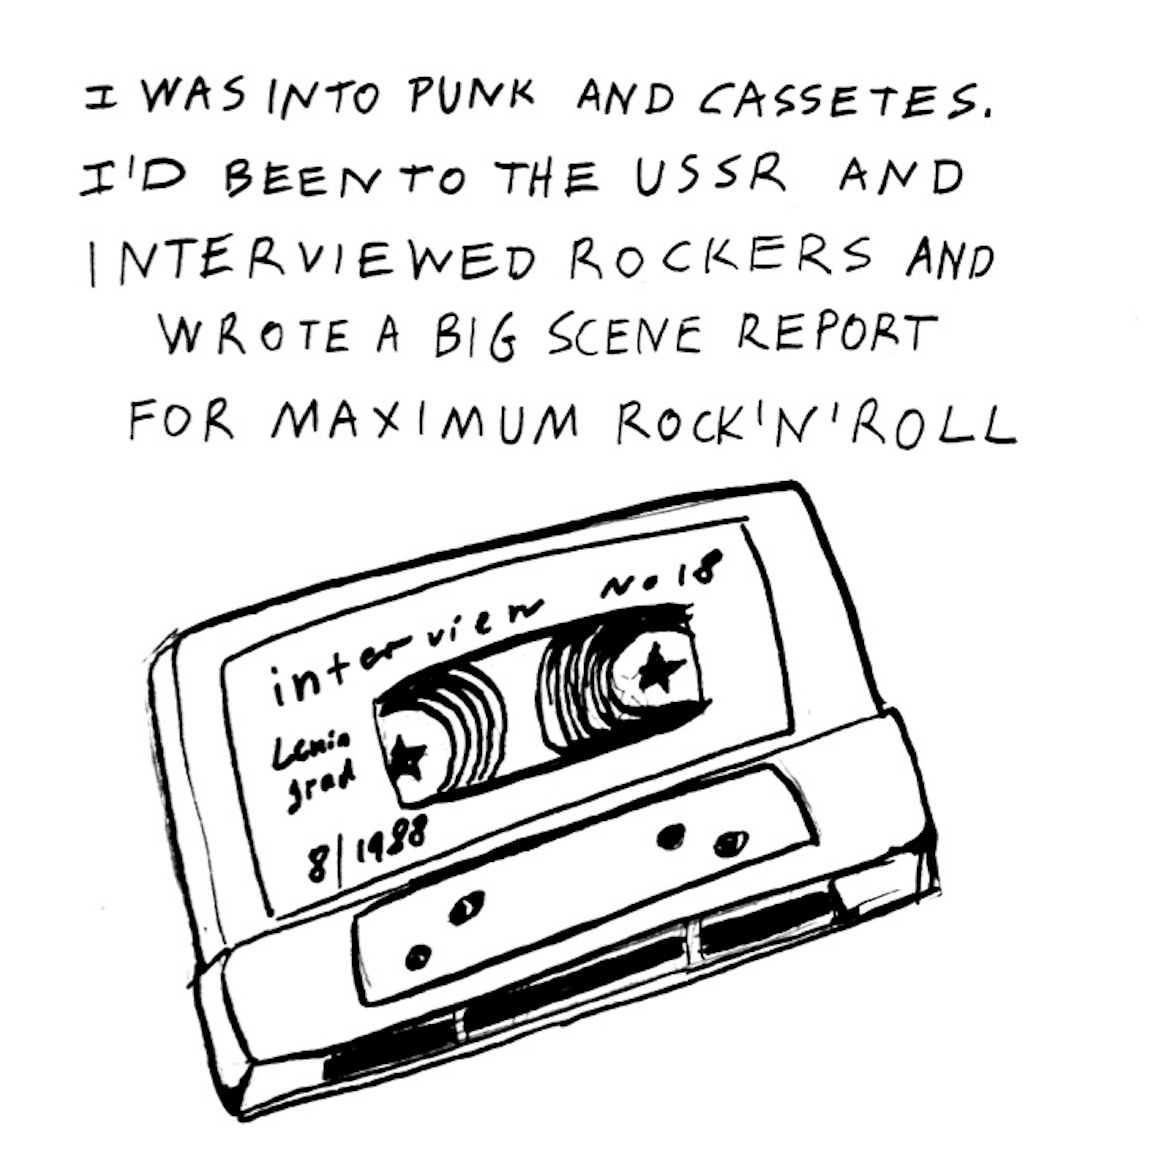 “I was into punk and cassettes. I’d been to the USSR and interviewed rockers and wrote a big scene report for maximum rock ’n’ roll.”